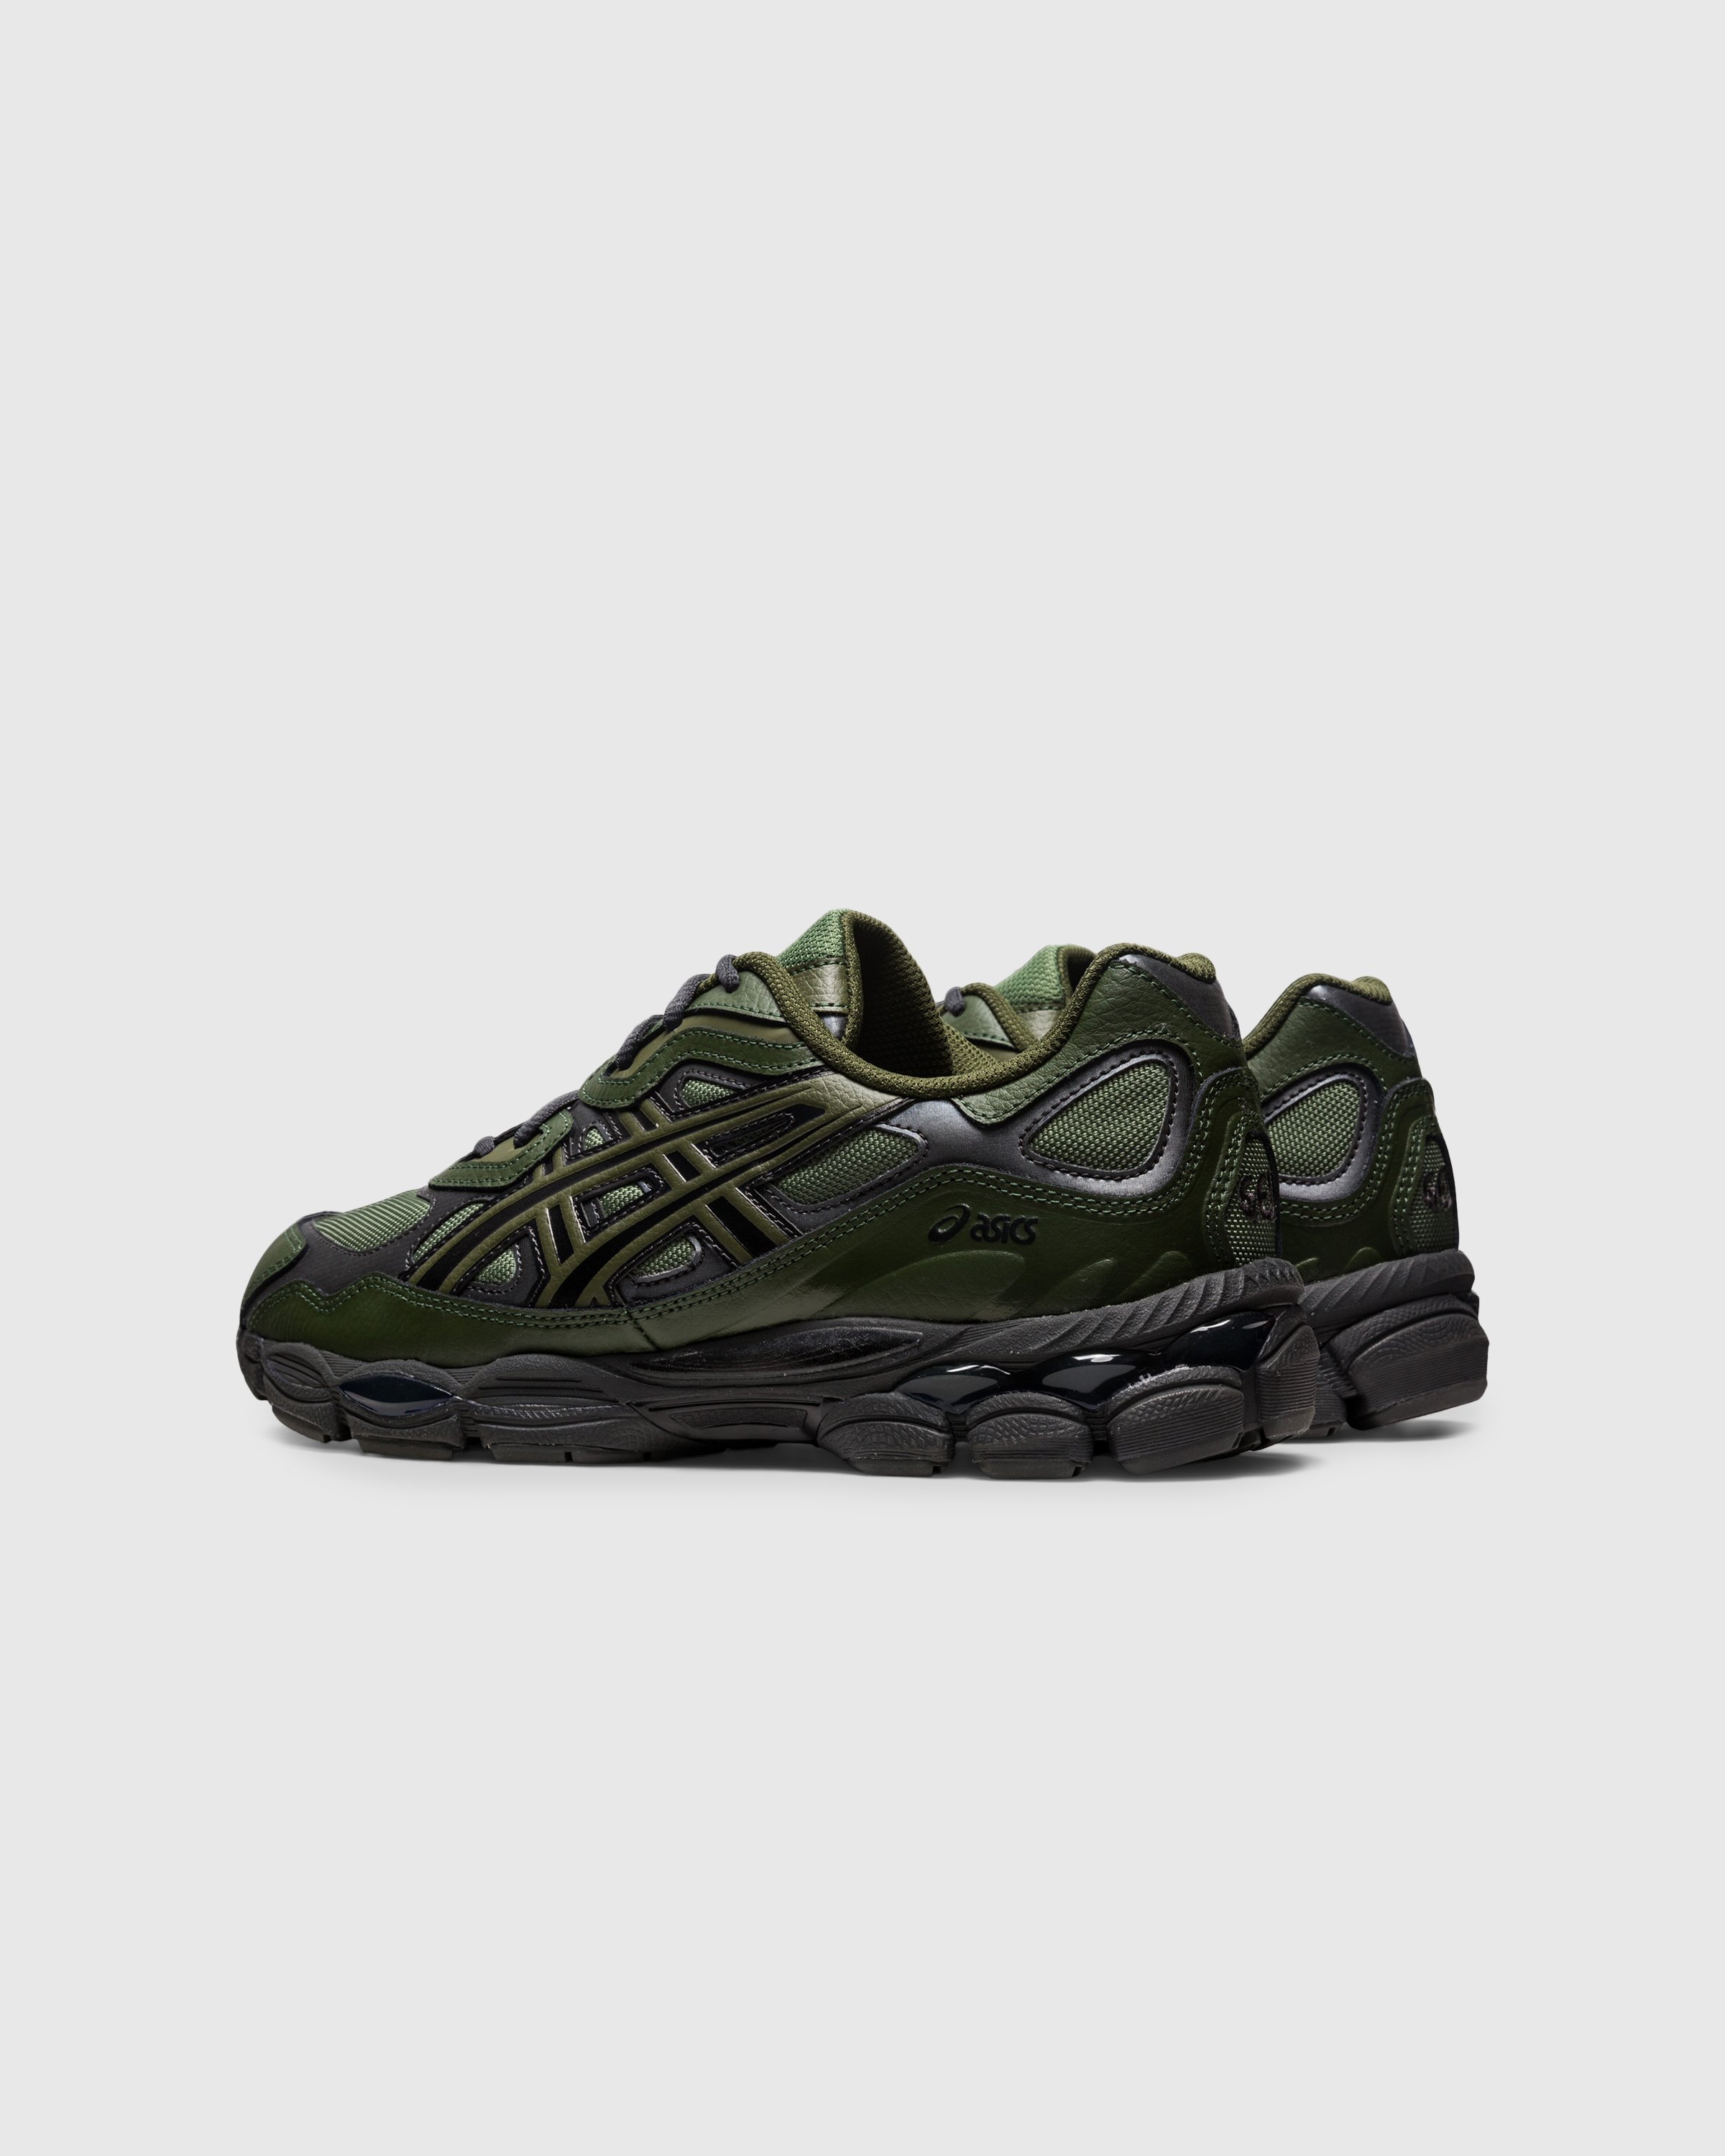 asics - GEL-NYC Moss/Forest - Footwear - Green - Image 4